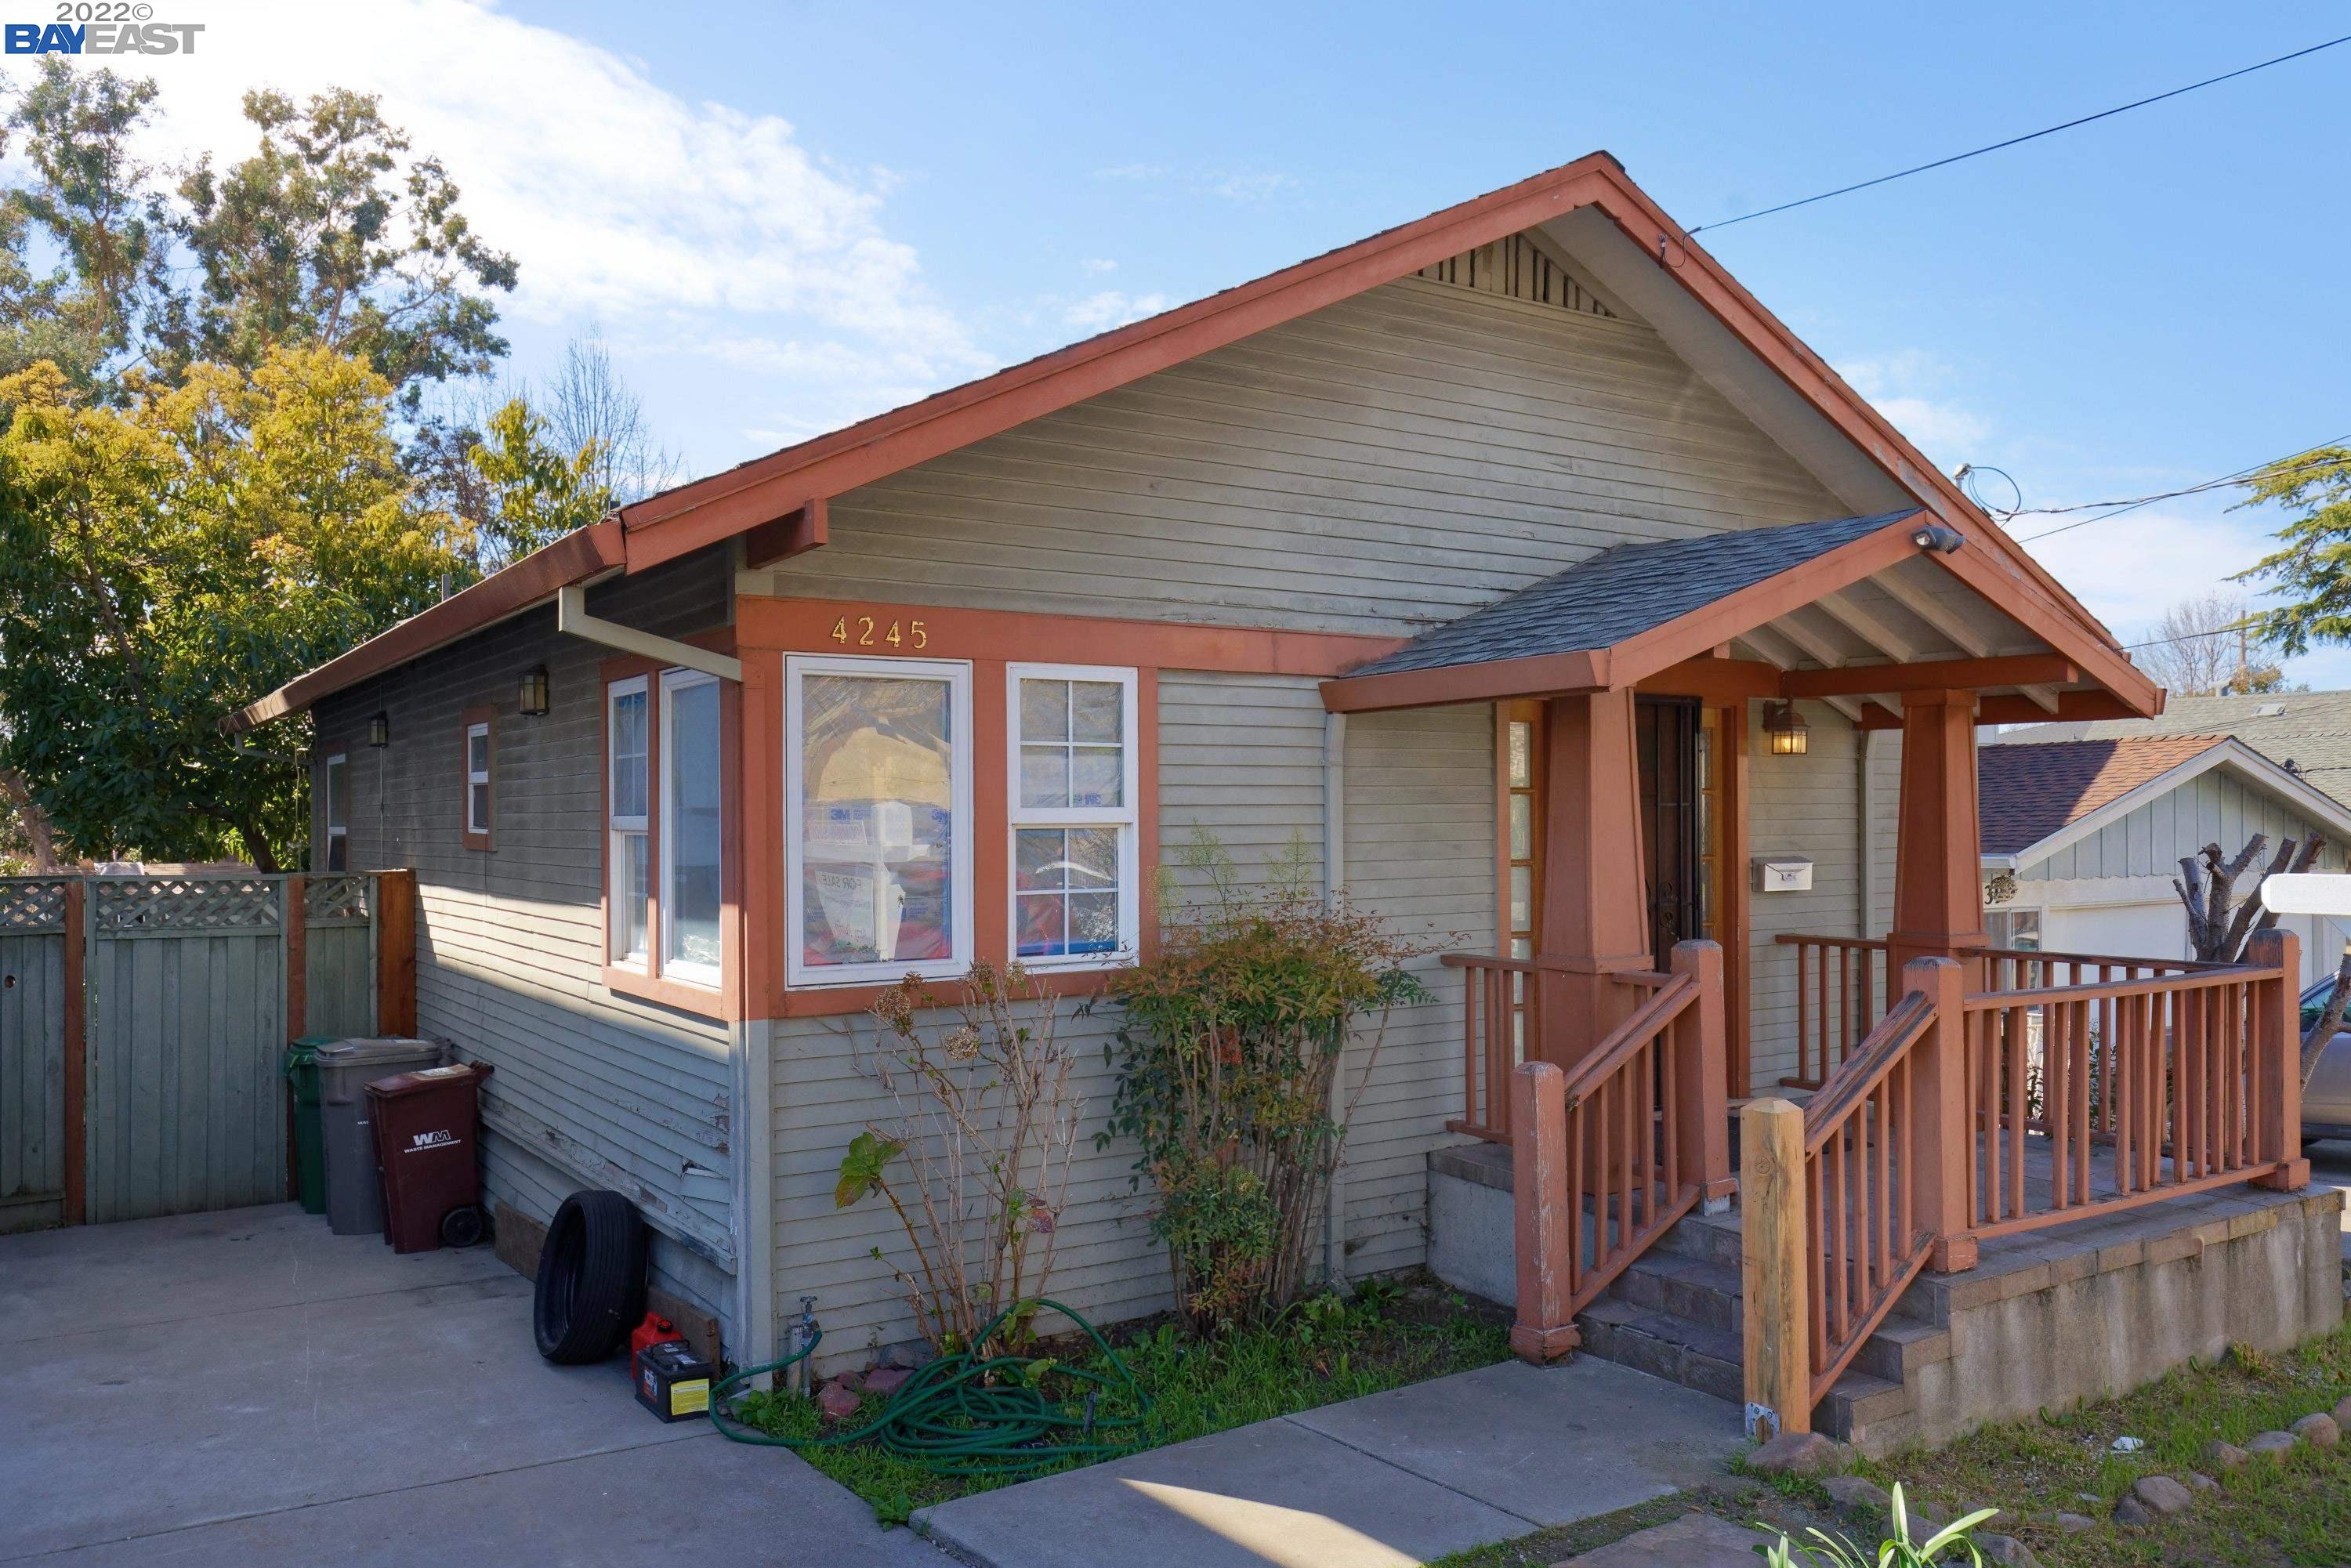 Photo of 4245 Masterson St in Oakland, CA